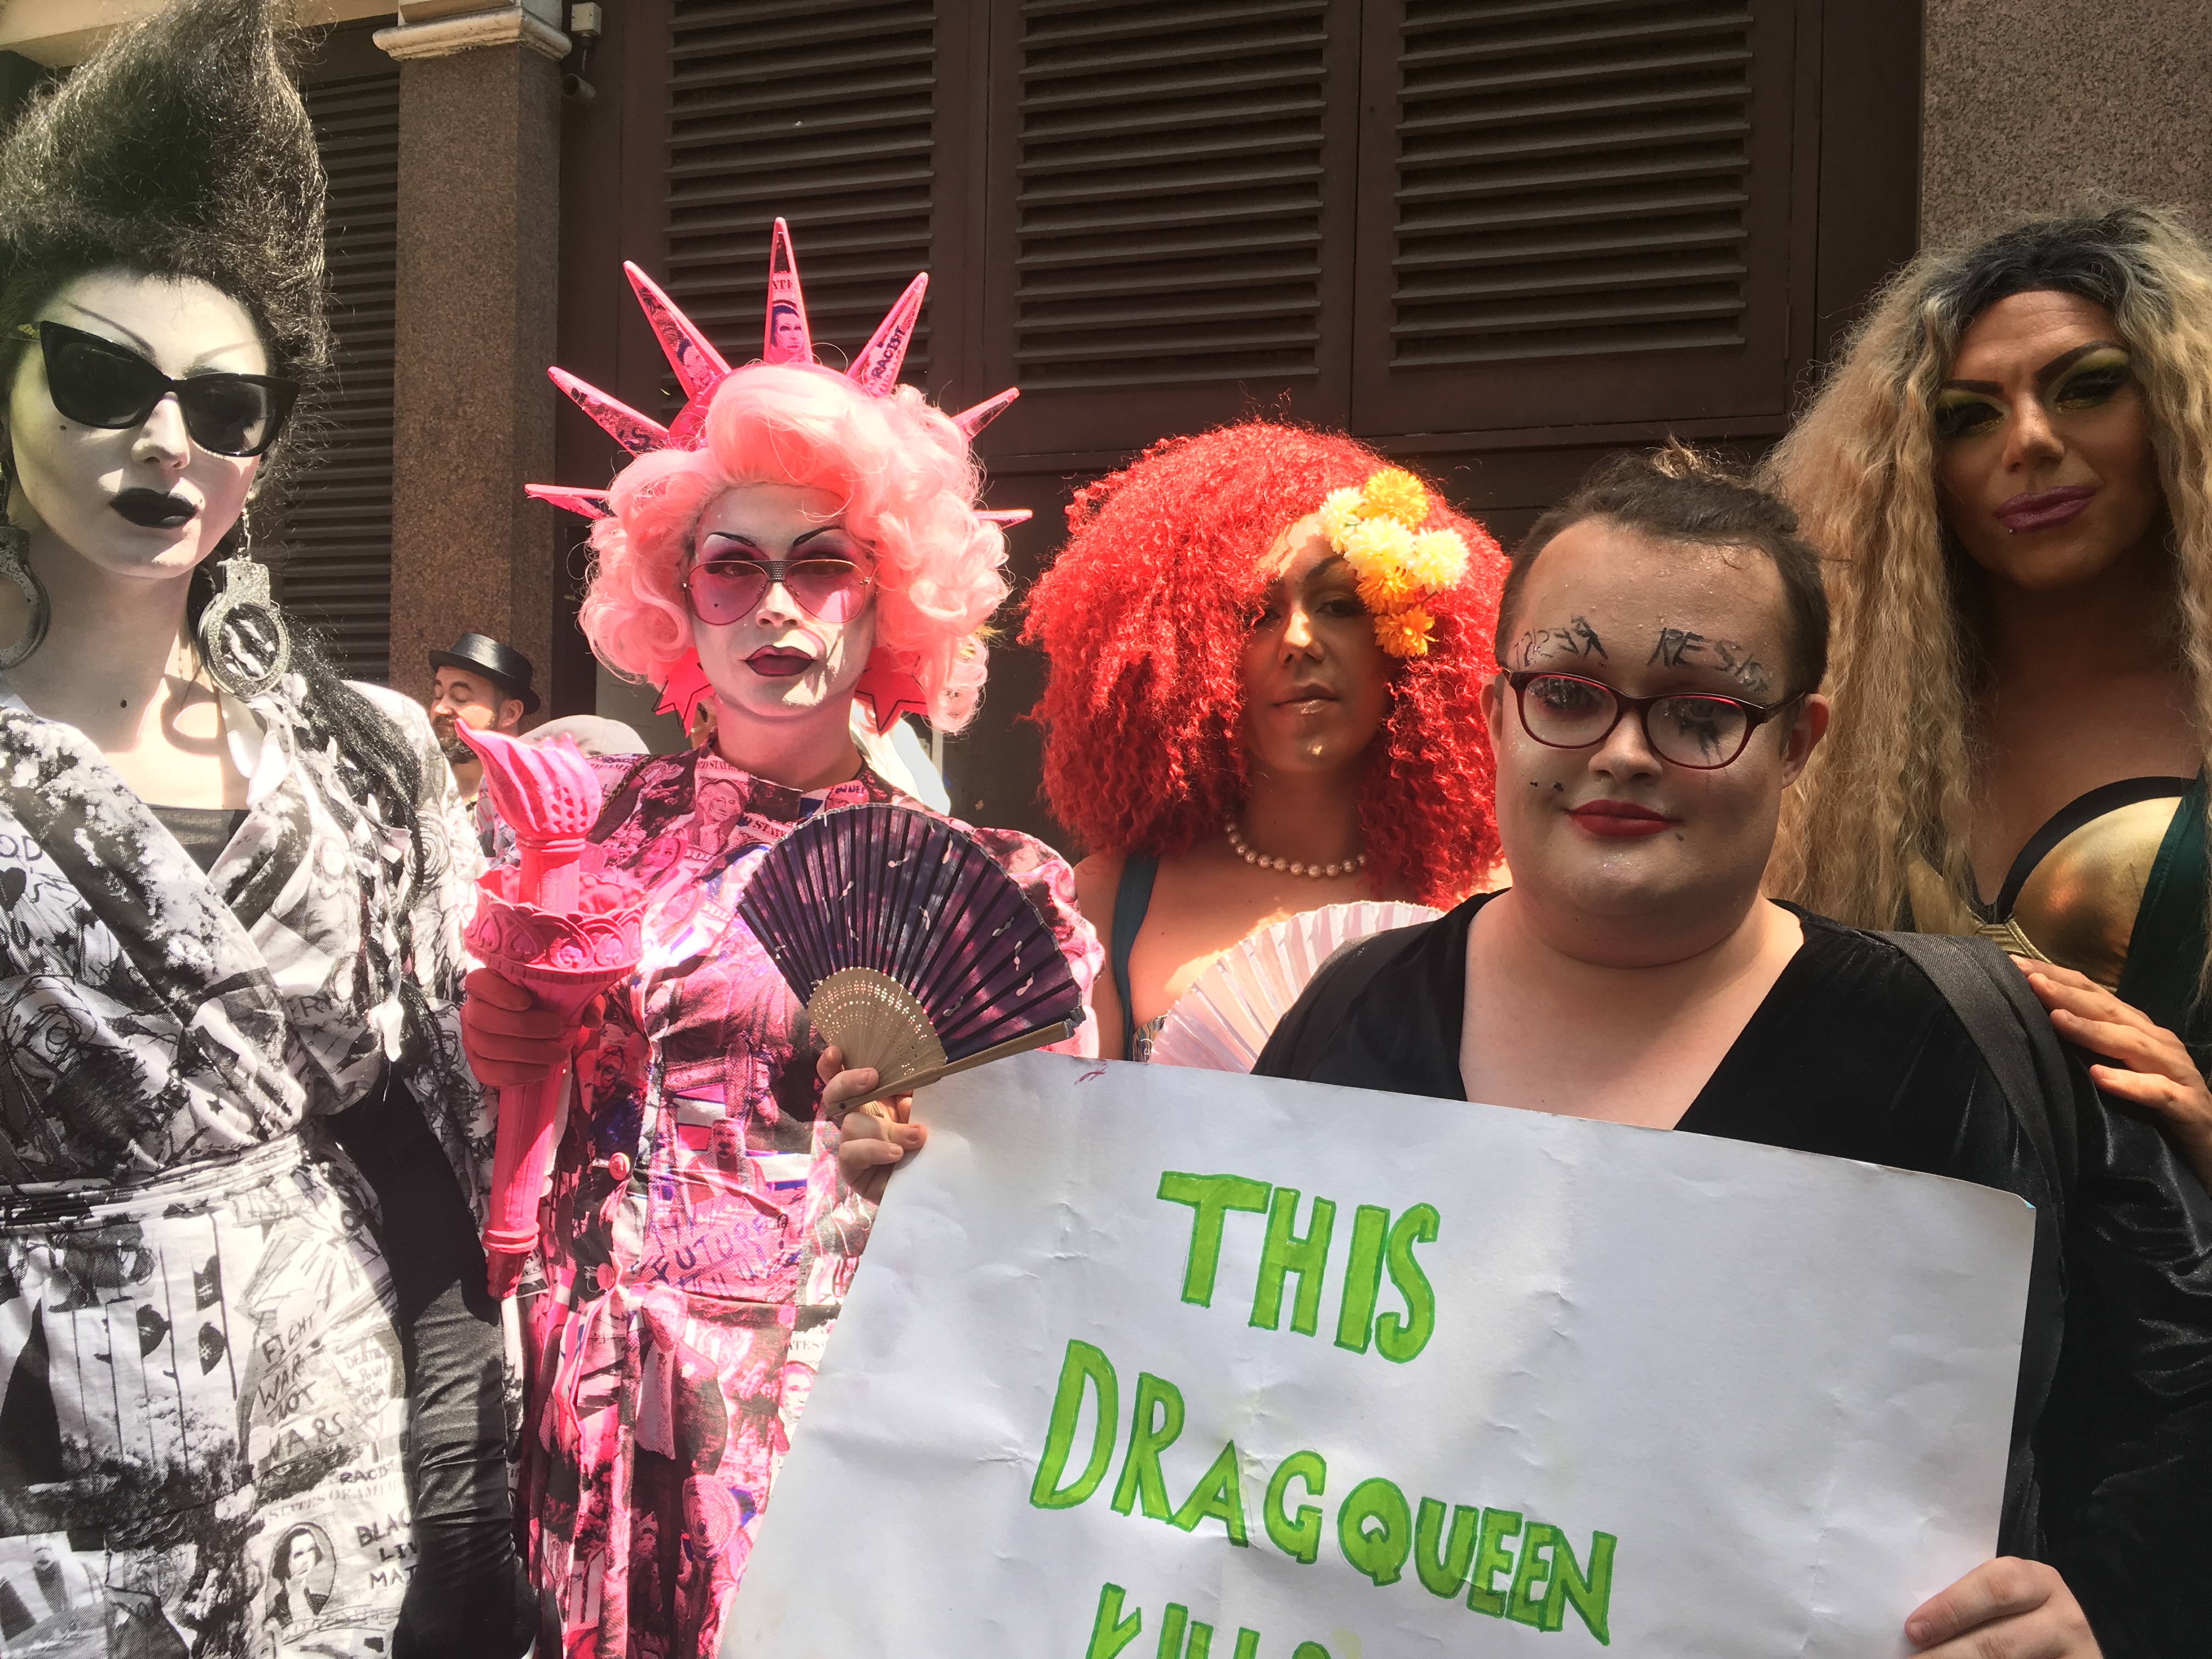 Drag queens, including Liquorice Black (far left), Maryanne Misandry (front centre) and Very Berry (far right), gather to protest Trump's visit in Soho, central London on July 13. (TIME)